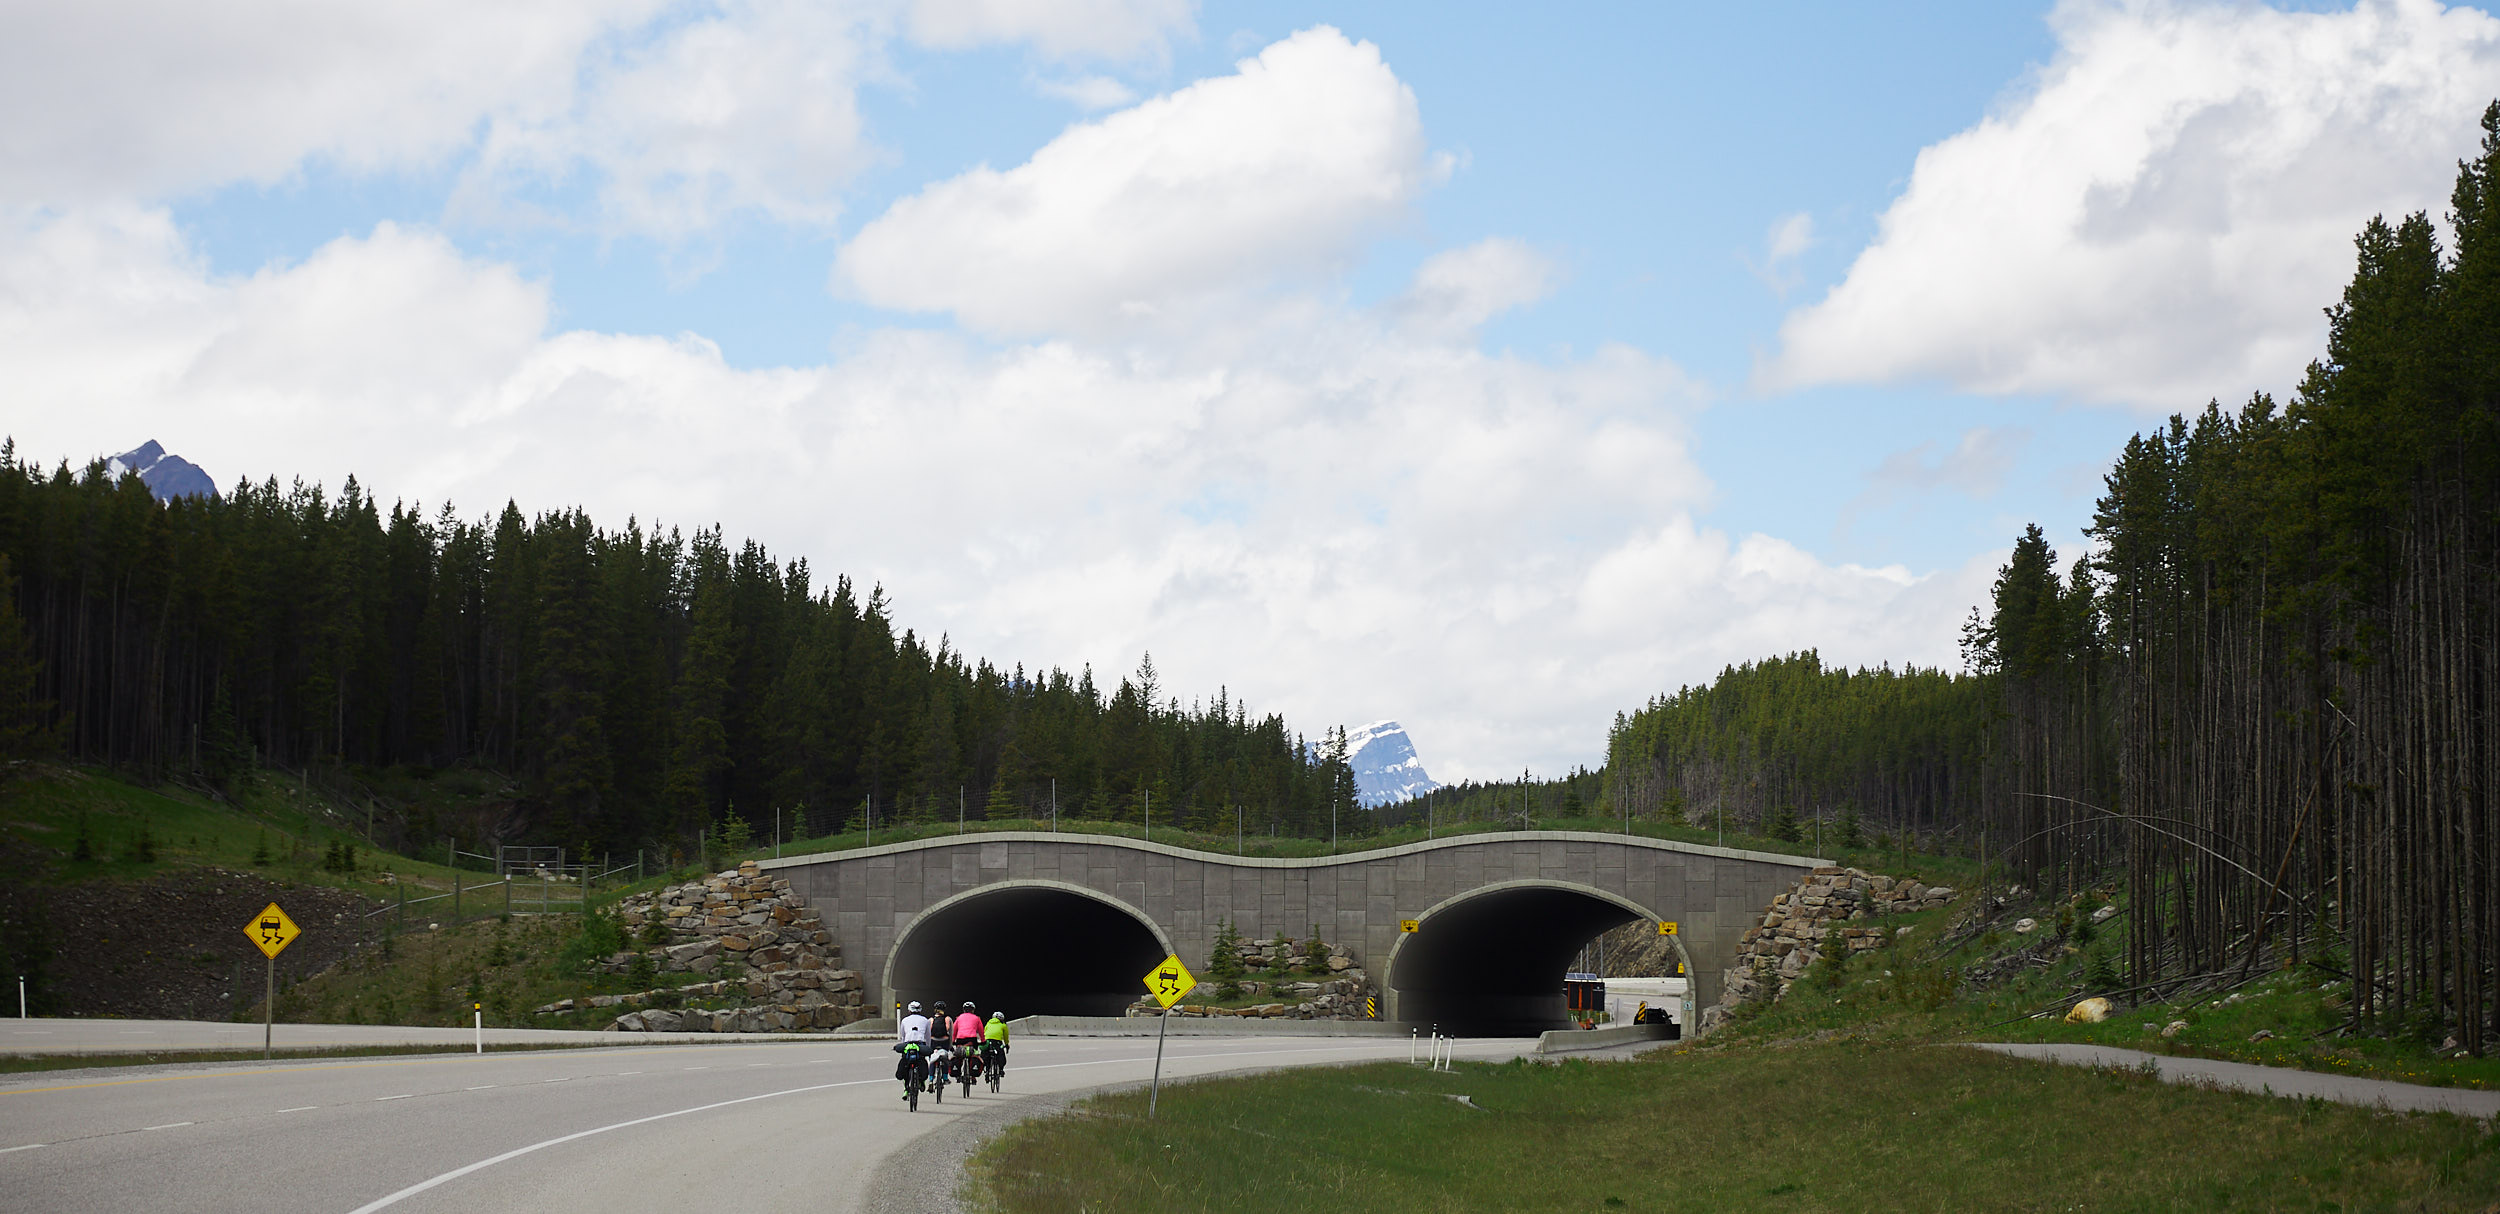  There are a number of natural overpasses that allow wildlife to cross the highway safely. 